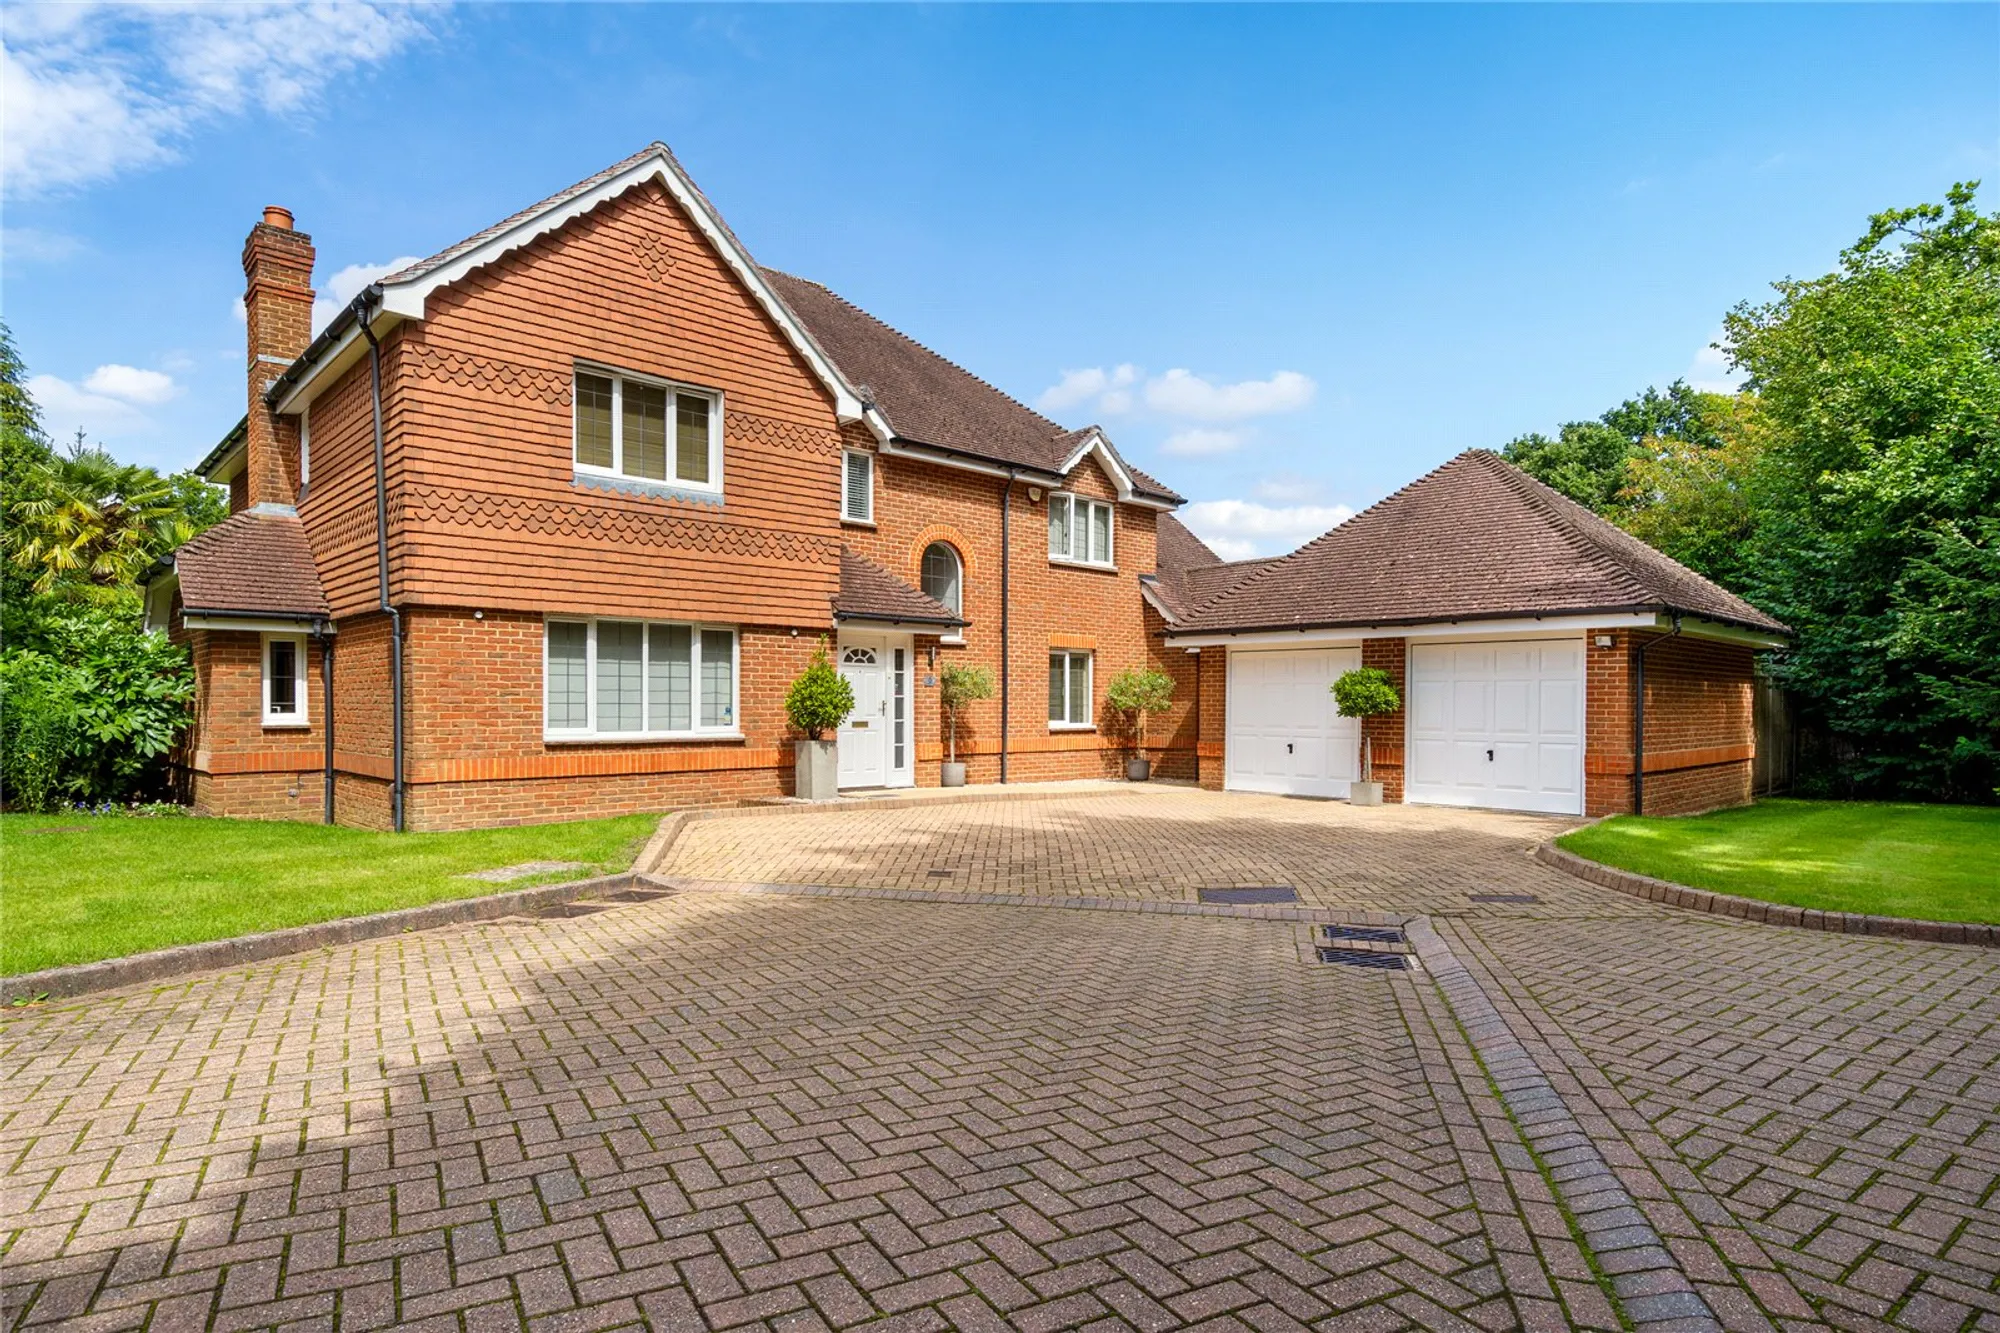 5 bed detached house for sale in Densham Drive, Purley 2